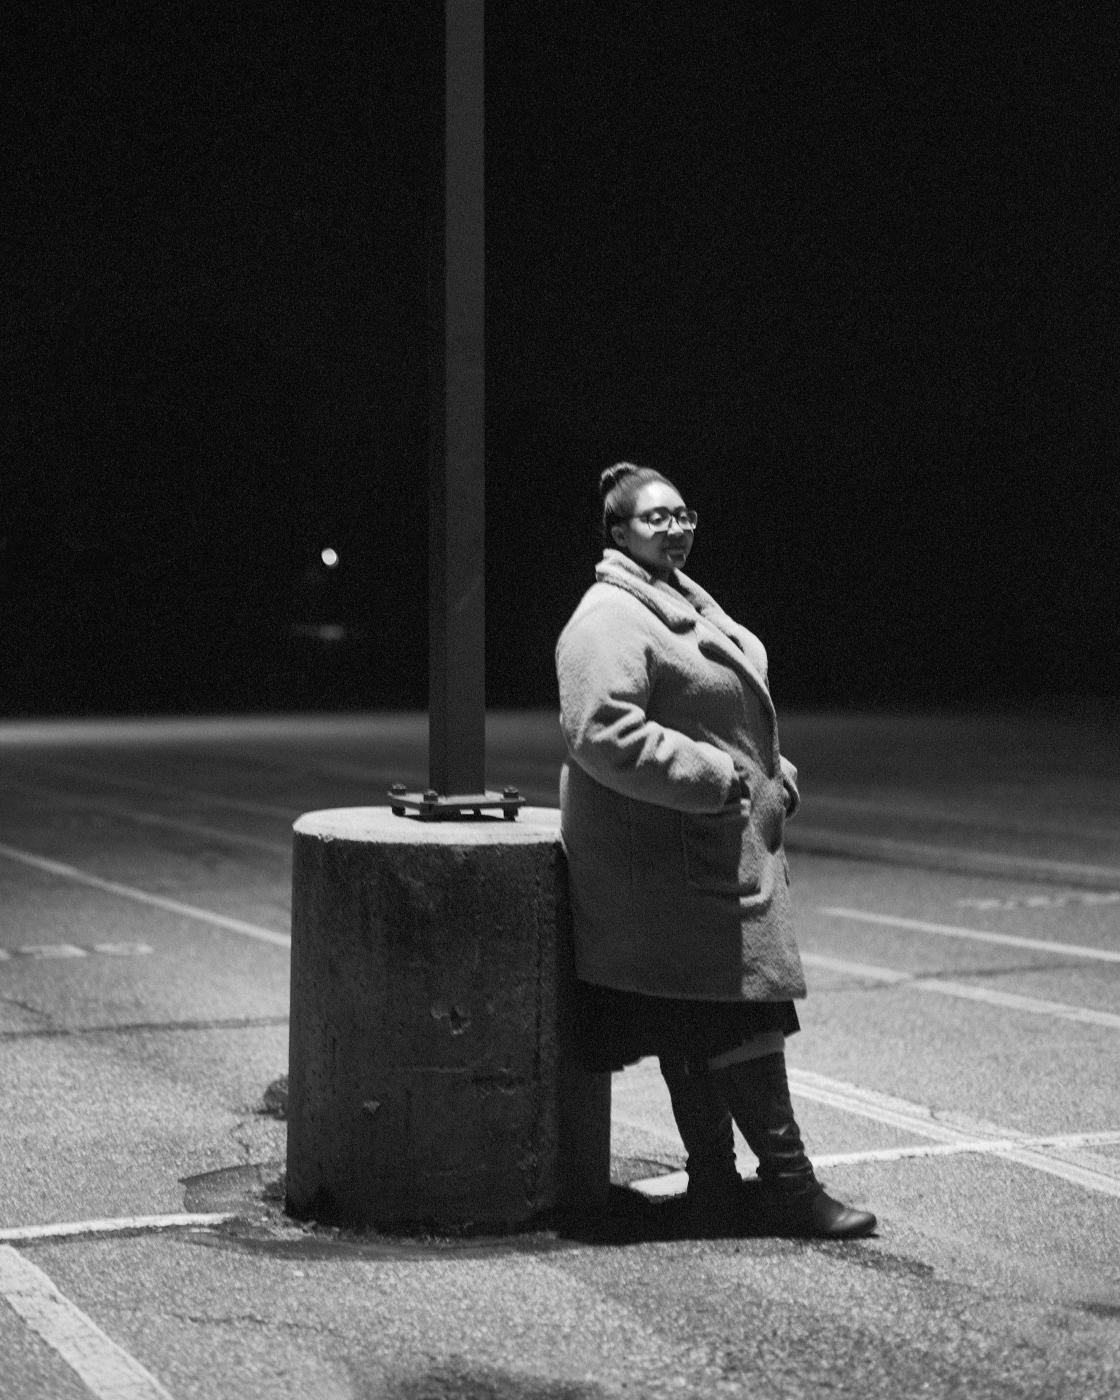 Image from Black & White  - Ciara in the high school parking lot 2, December 2023